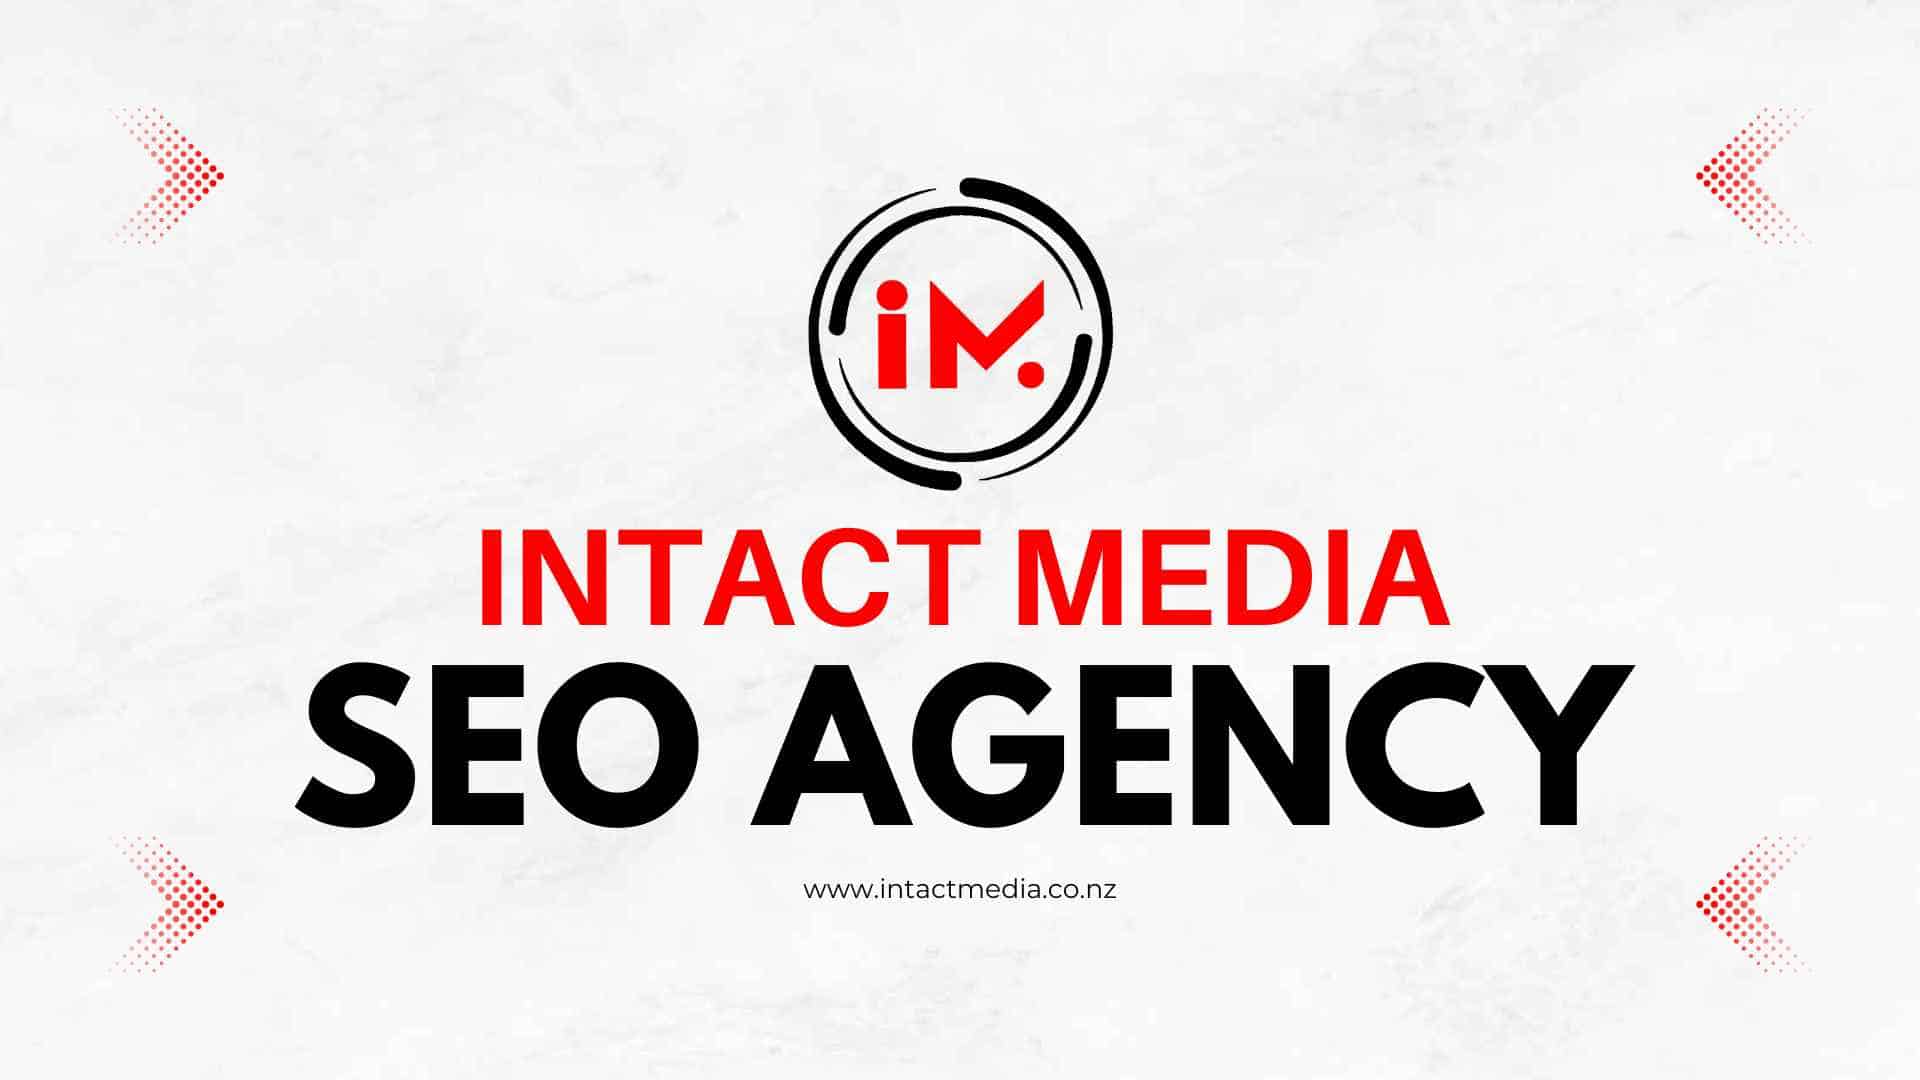 Intact Media Limited